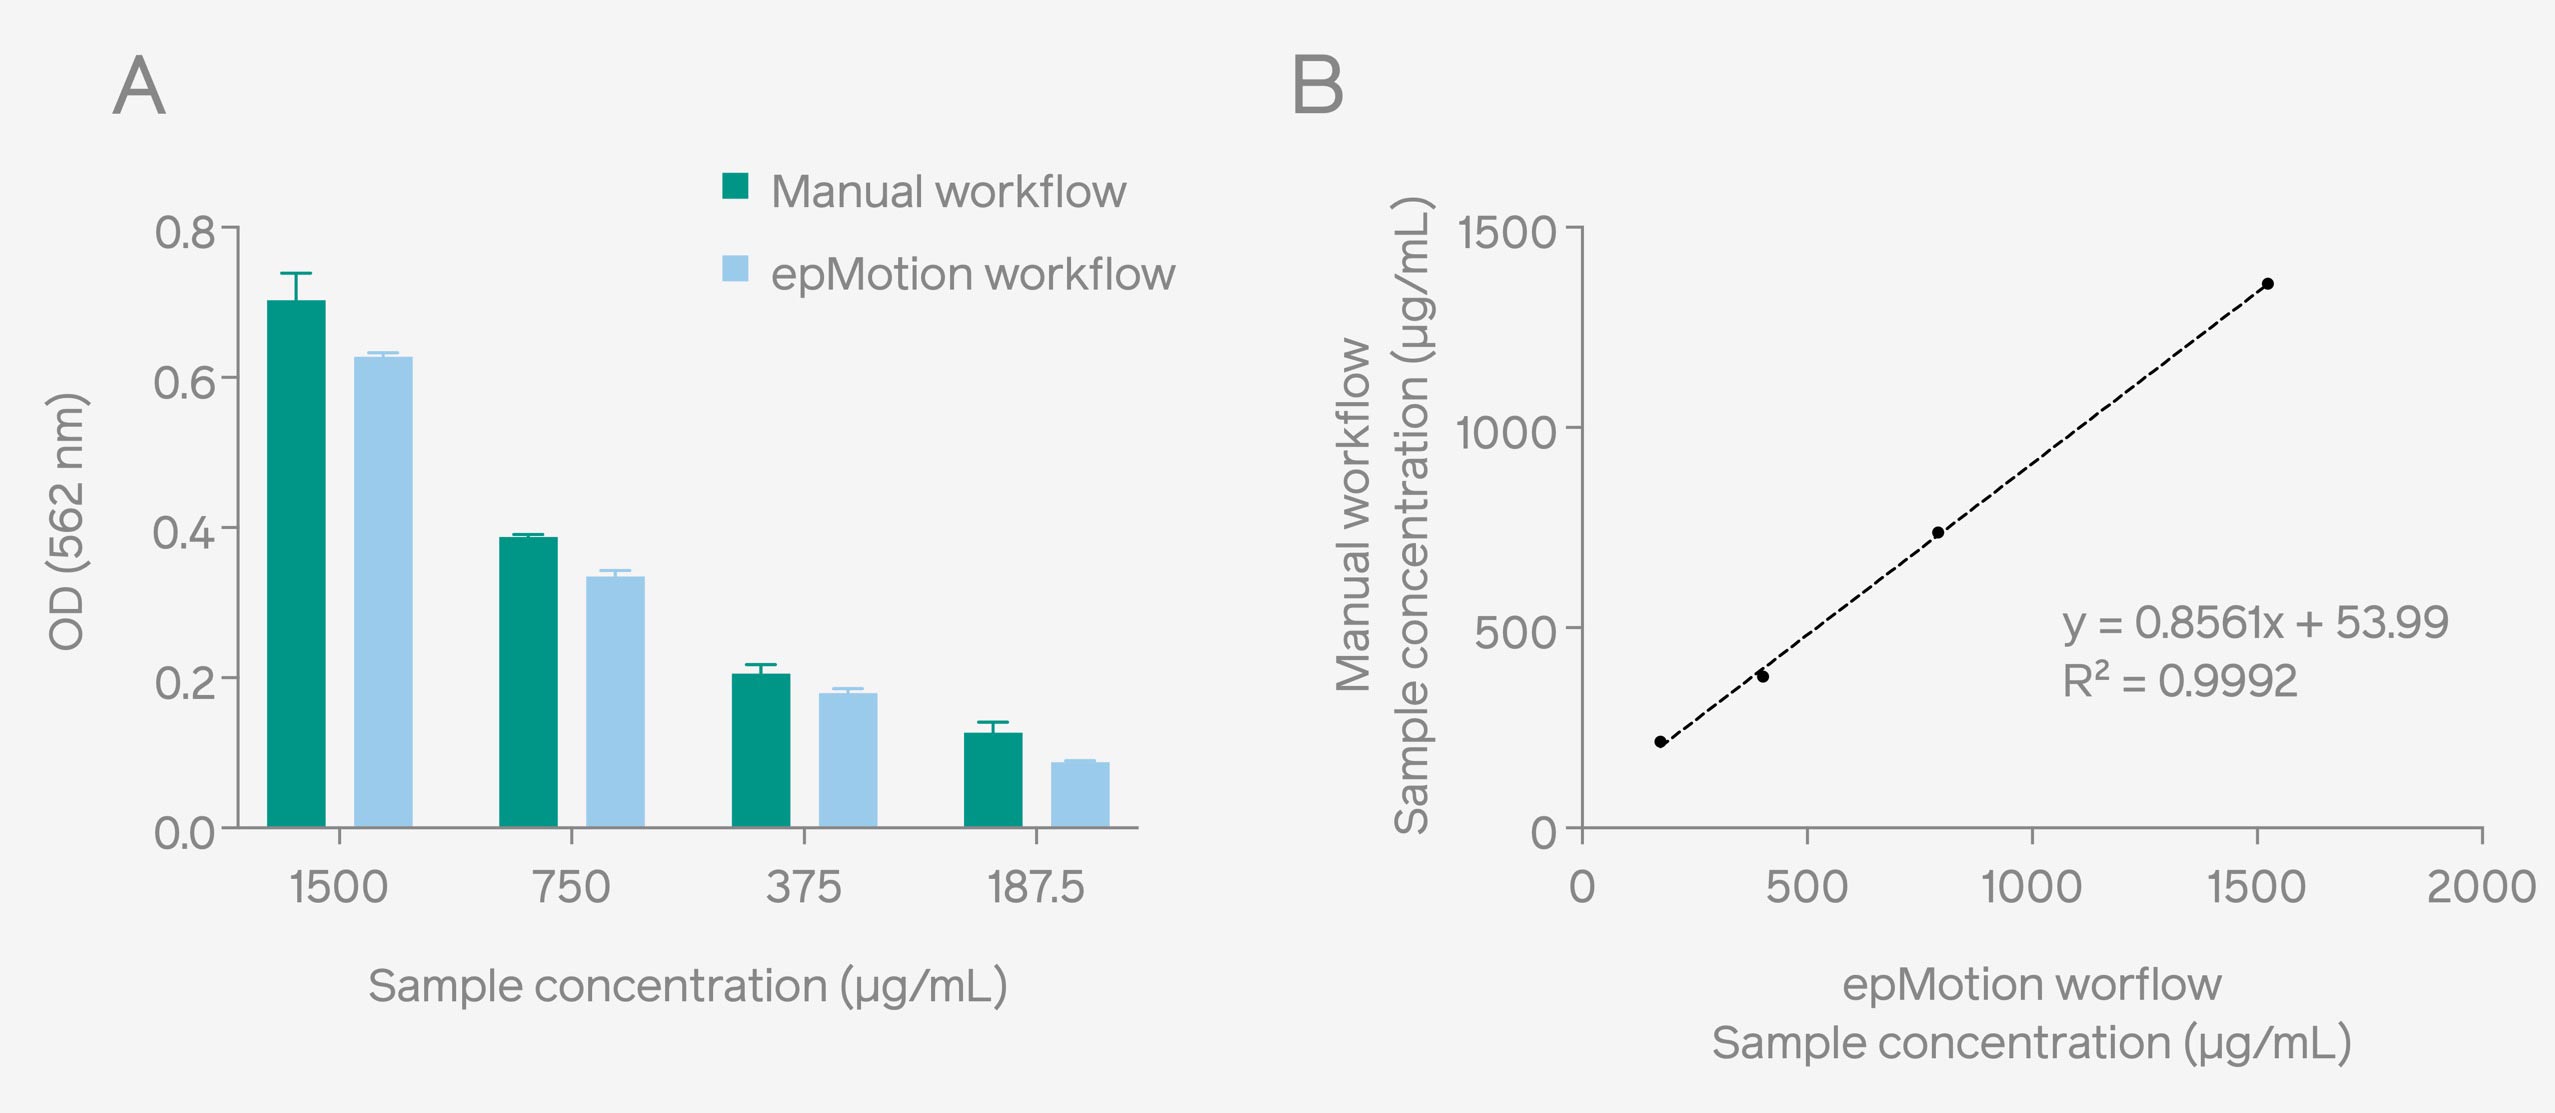 Fig. 2: OD readouts of unknown protein samples obtained through the epMotion® and manual workflow using Pierce™ Microplate BCA Protein Assay Kit (A). A comparison shows a strong correlation of the sample concentration between both methods (B). Streamlined Protein Quantification: Enhancing Speed and Precision with Absorbance 96 Automate seamlessly integrated into Eppendorf epMotion® Byonoy